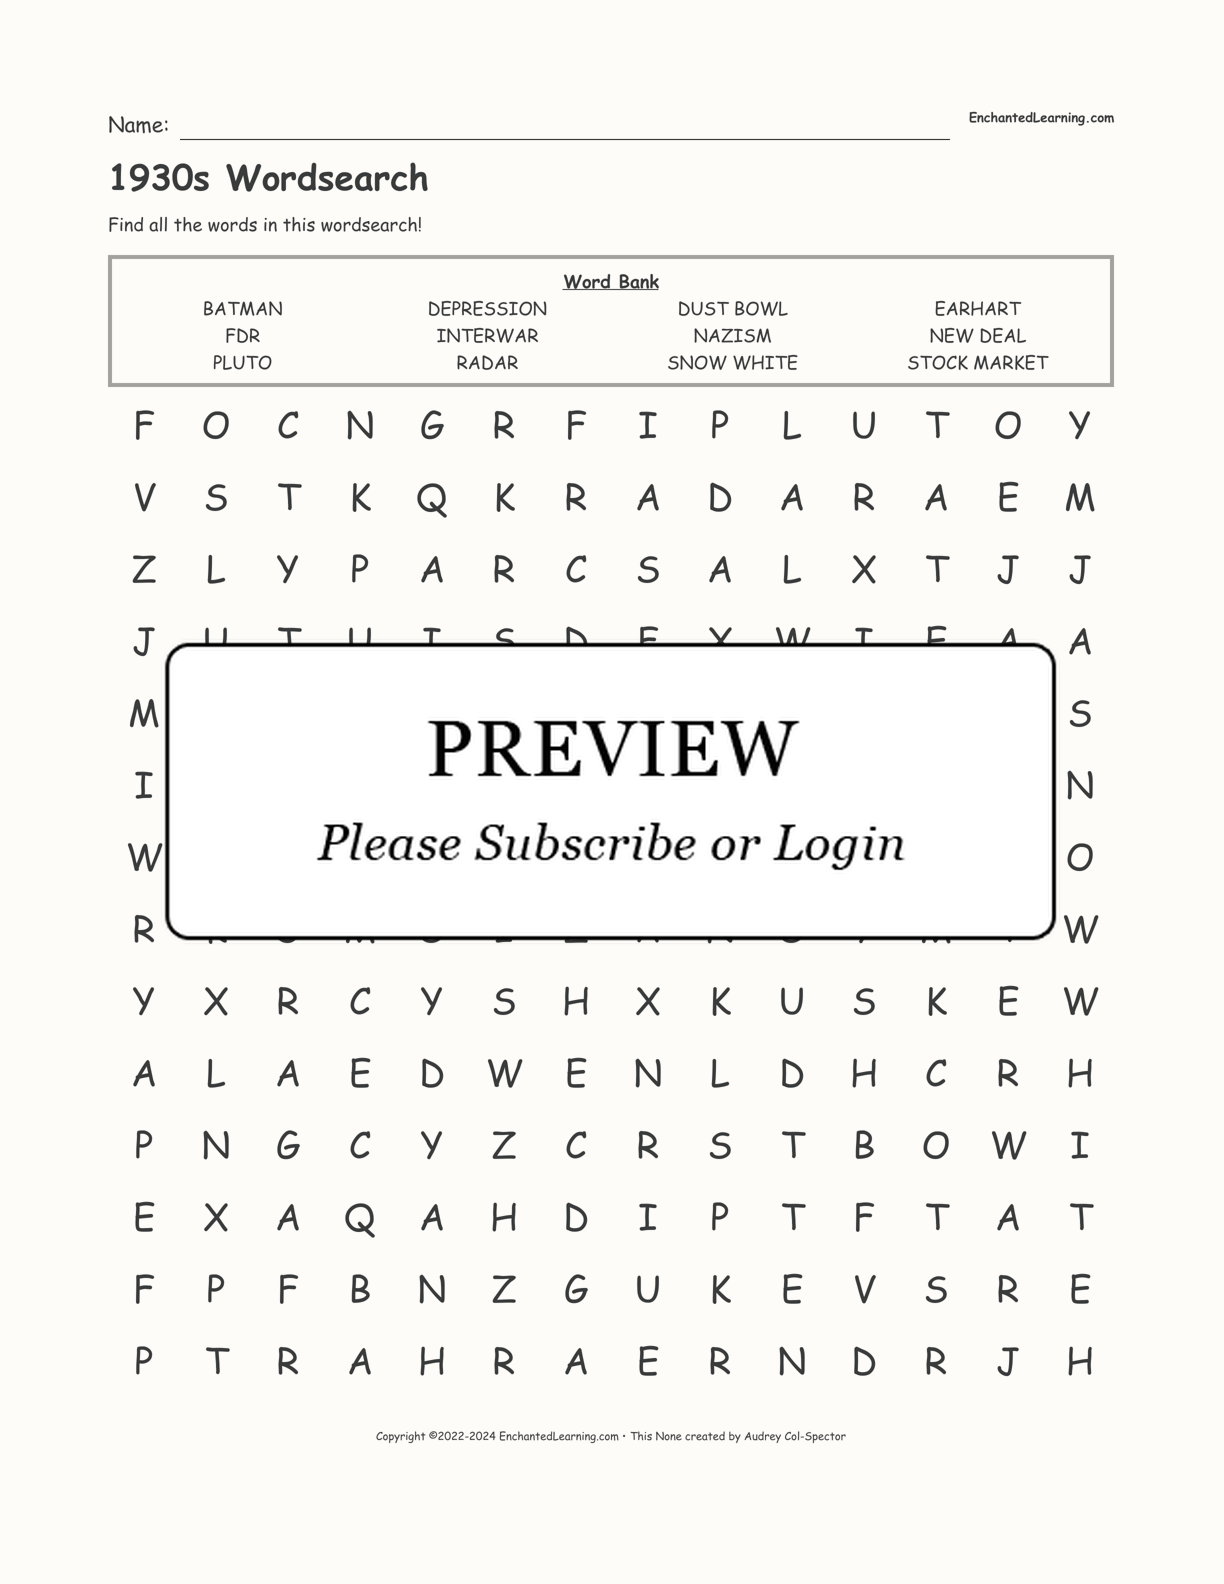 1930s Wordsearch interactive worksheet page 1